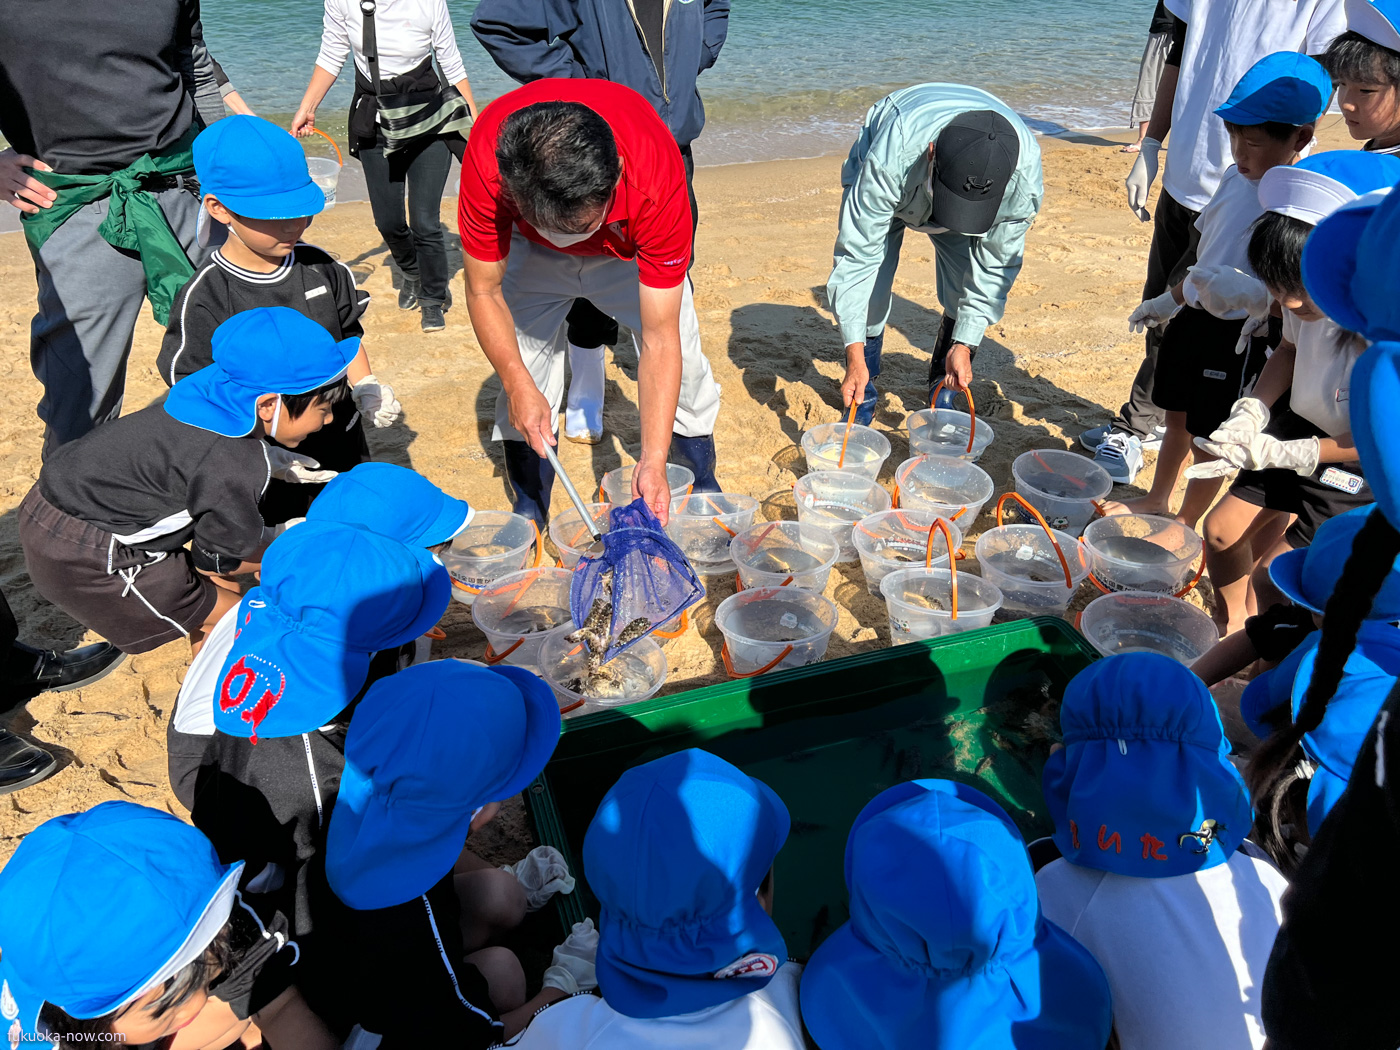 Uotabi Tour baby fish released into the sea, JF糸島の稚魚放流イベント